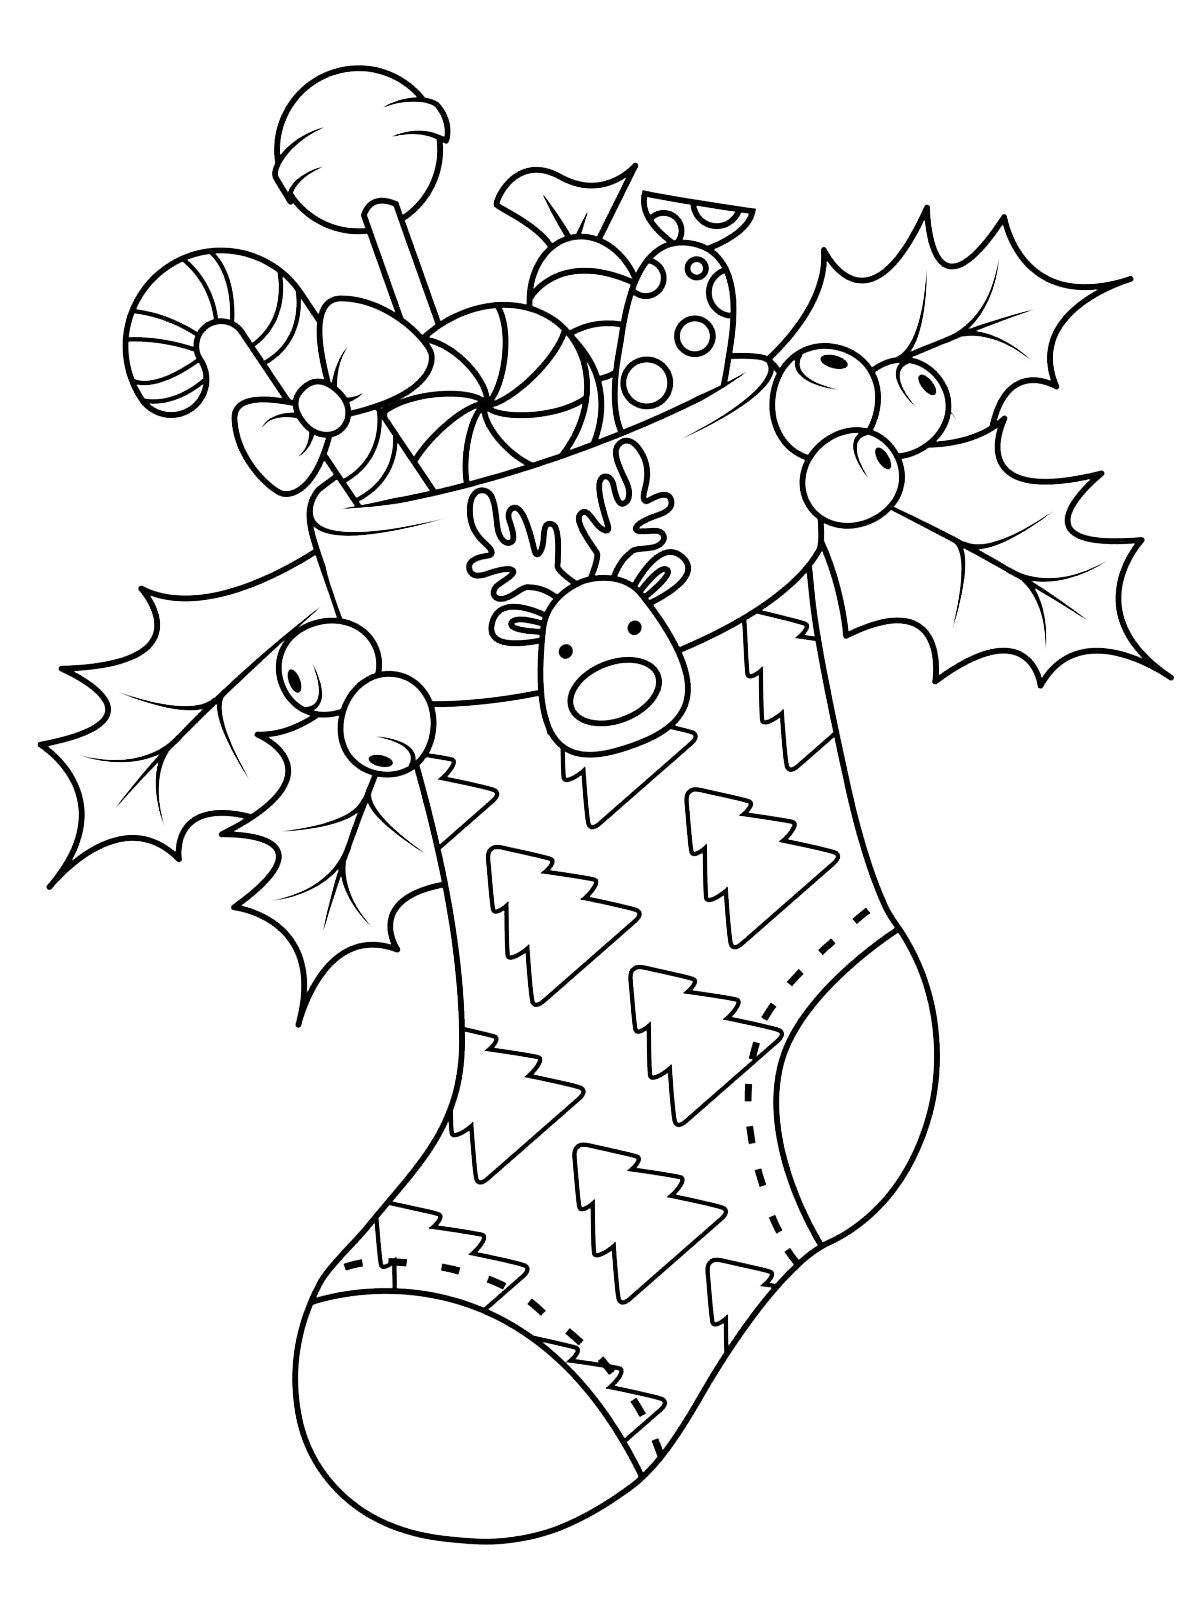 Fancy Christmas socks coloring page